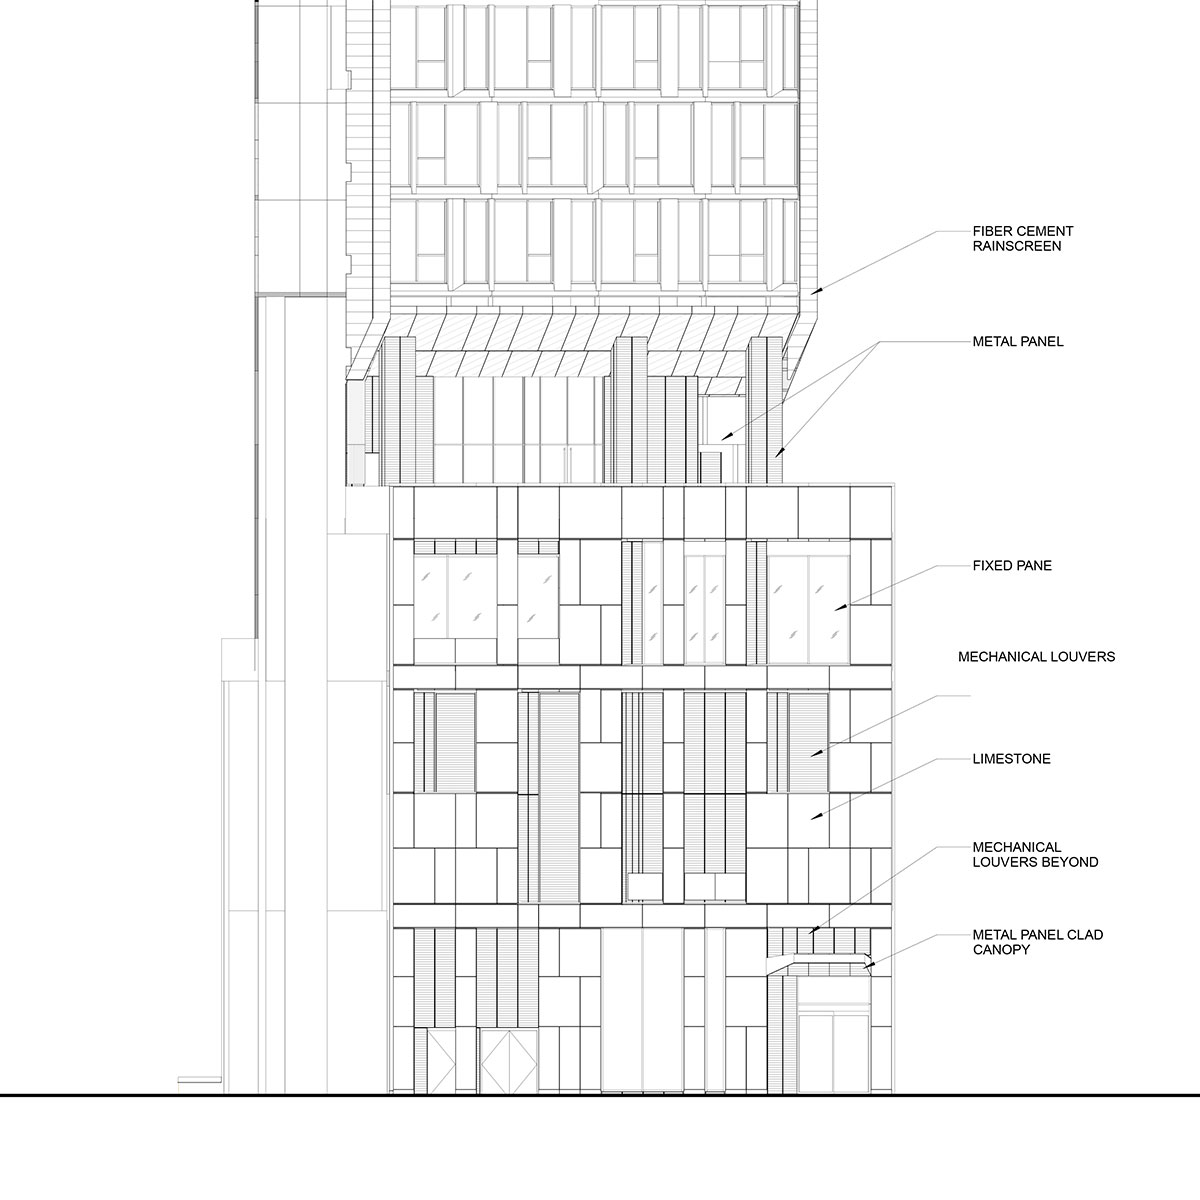 West facade elevation view of the Modular AC Hotel project located at 842 Sixth Avenue in NoMad, New York City designed by the architecture studio Danny Forster & Architecture